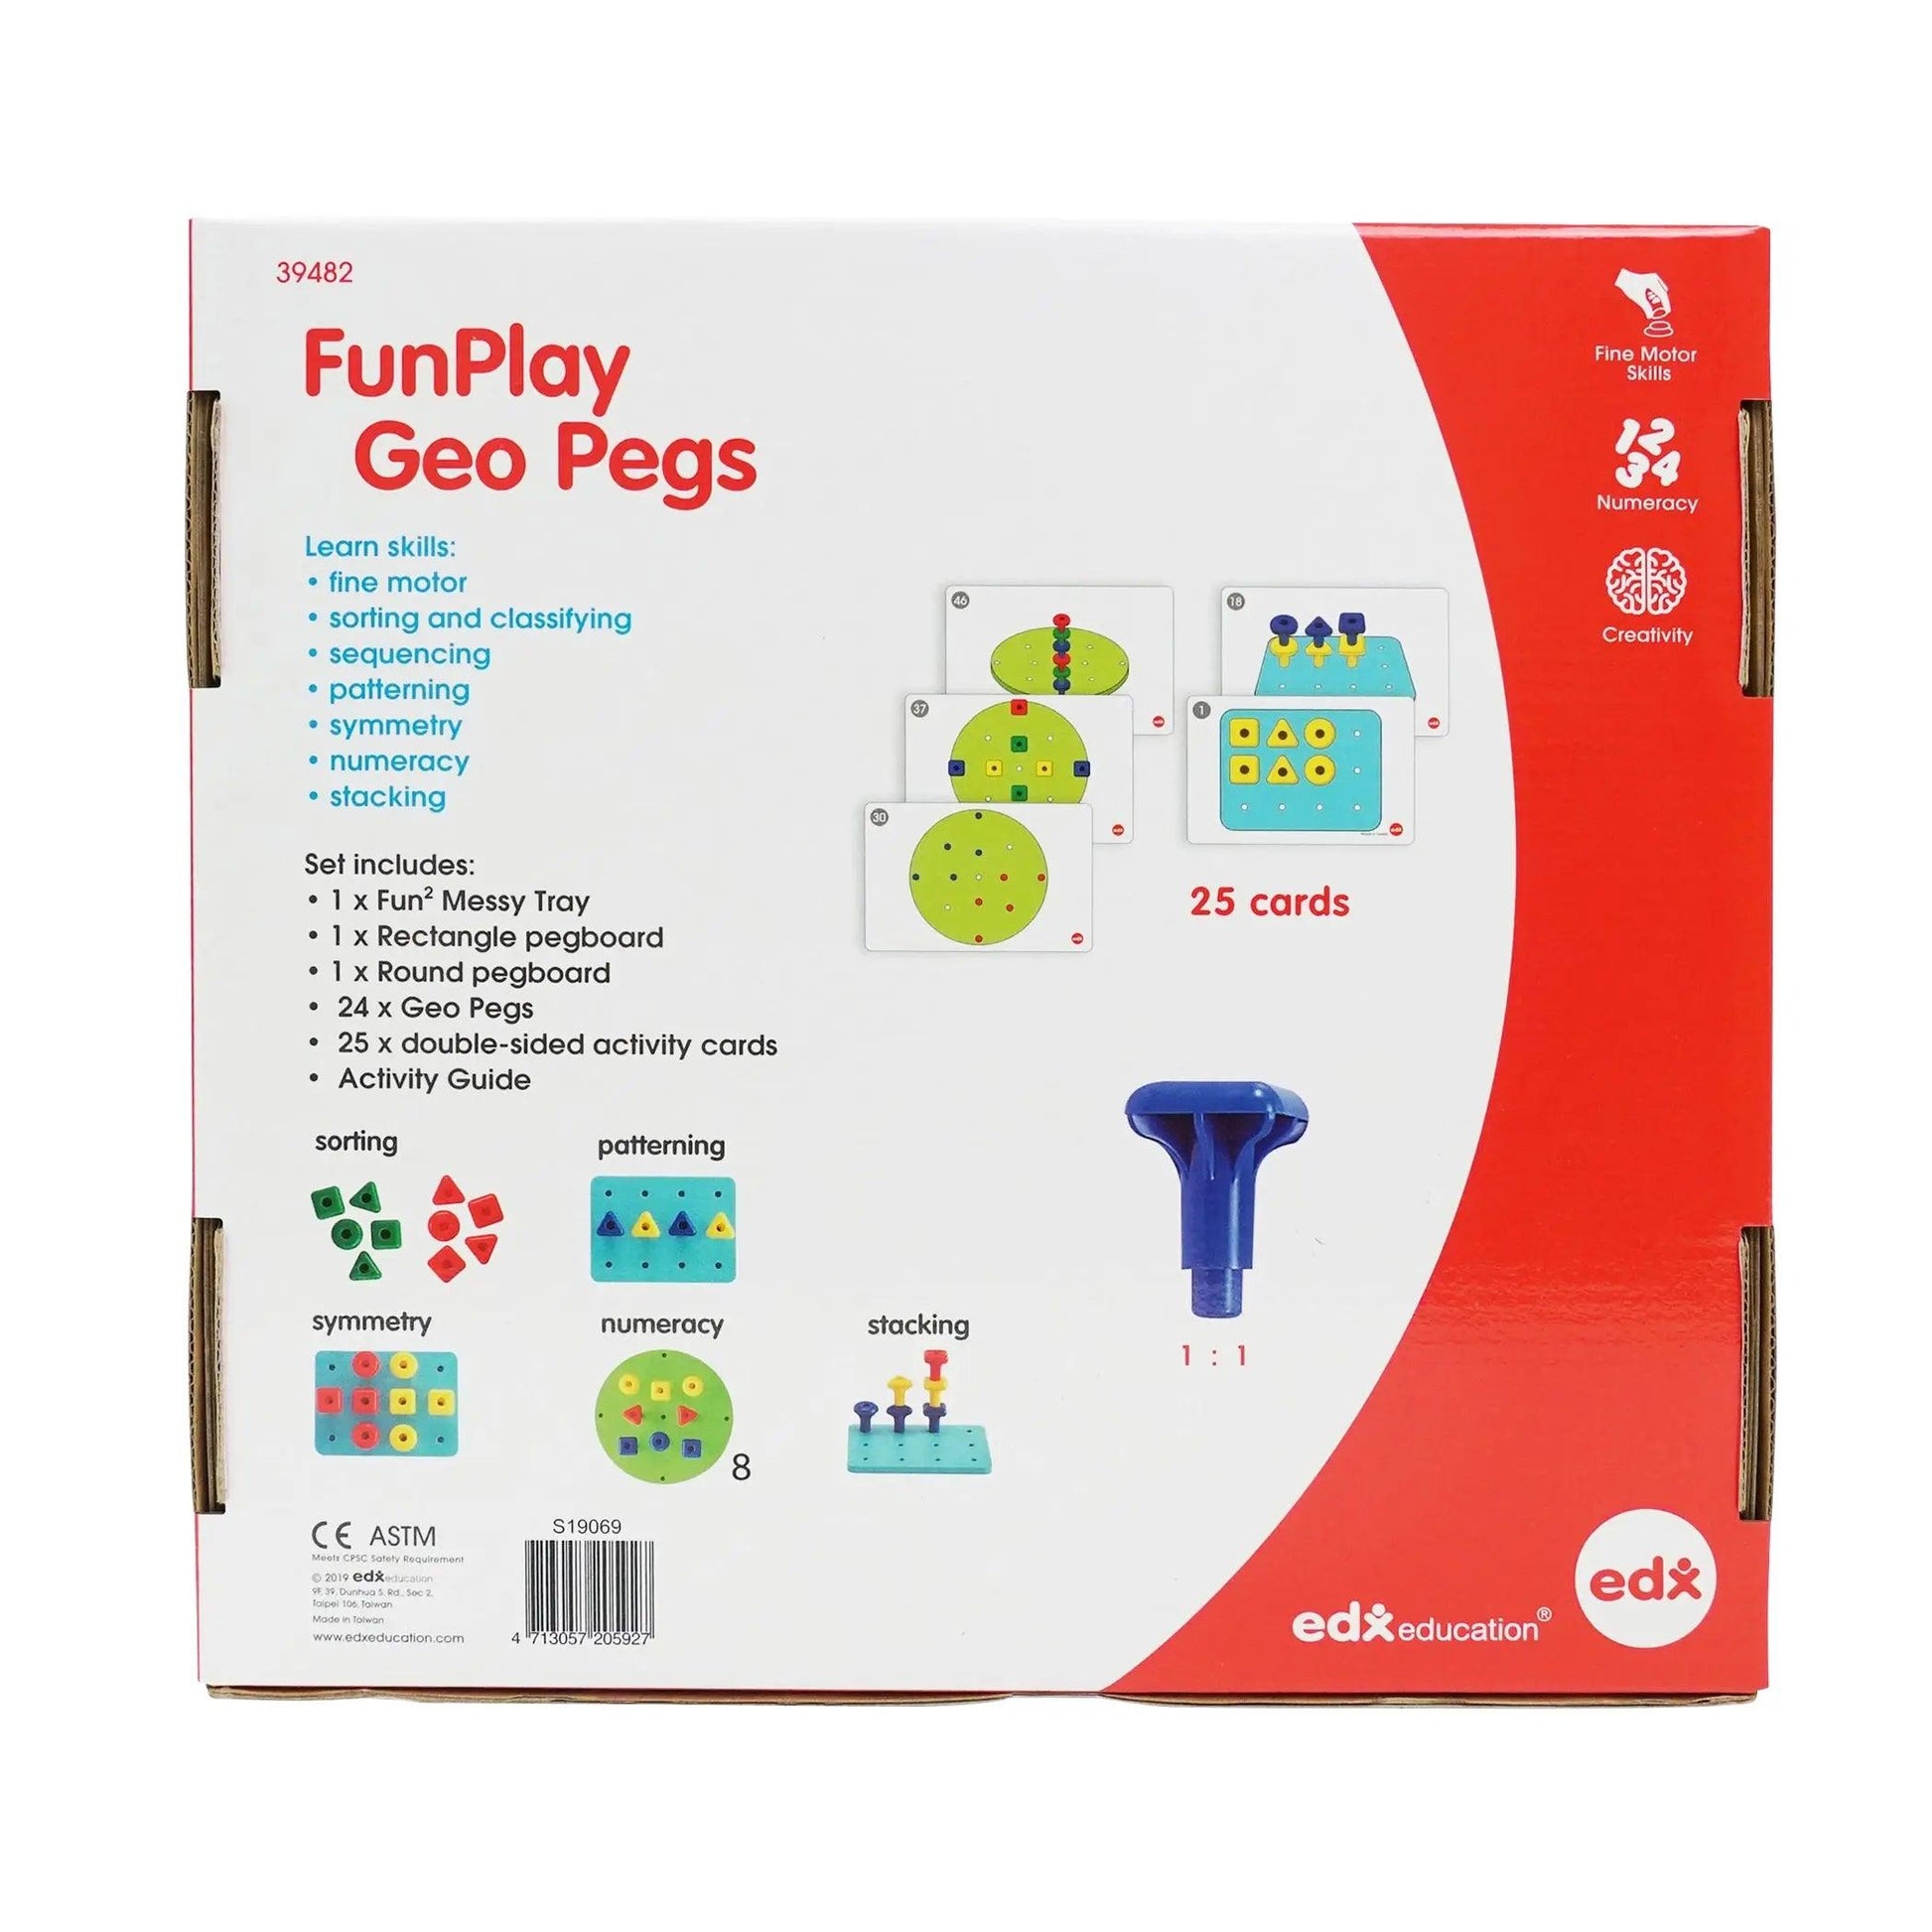 FunPlay Geo Pegs - 18m+ - 24 Plastic Pegs + 2 Pegboards + 50 Activities + Messy Tray Edxeducation®